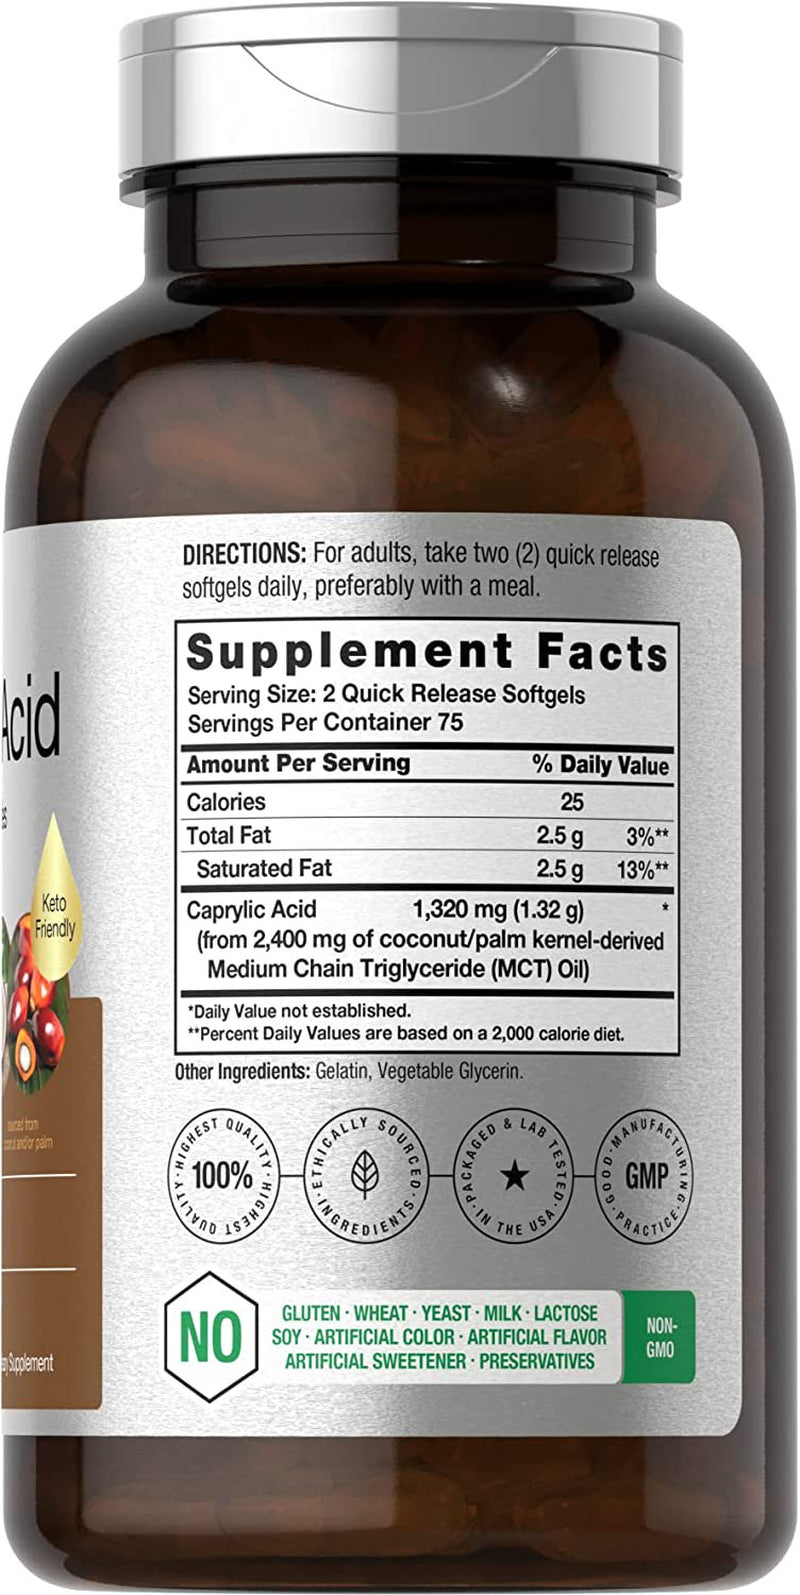 Caprylic Acid 1320 Mg | 150 Softgel Capsules | from MCT Oil | by Horbaach